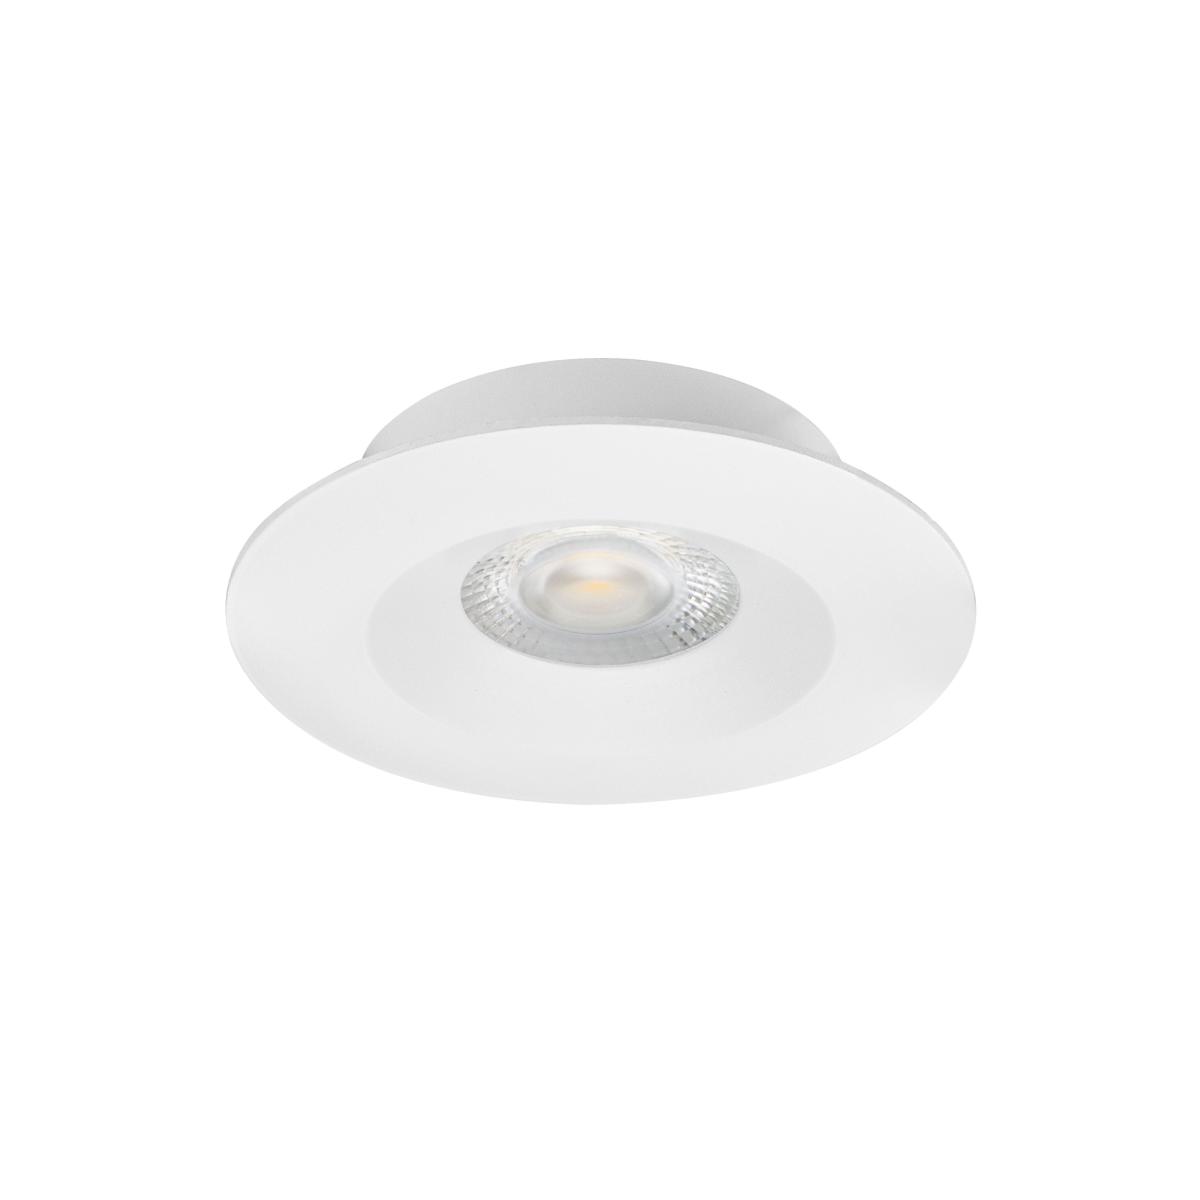 Spot LED extra-plat dimmable recouvrable isolant ARIC 5W 36° 220V Aspen  50749.